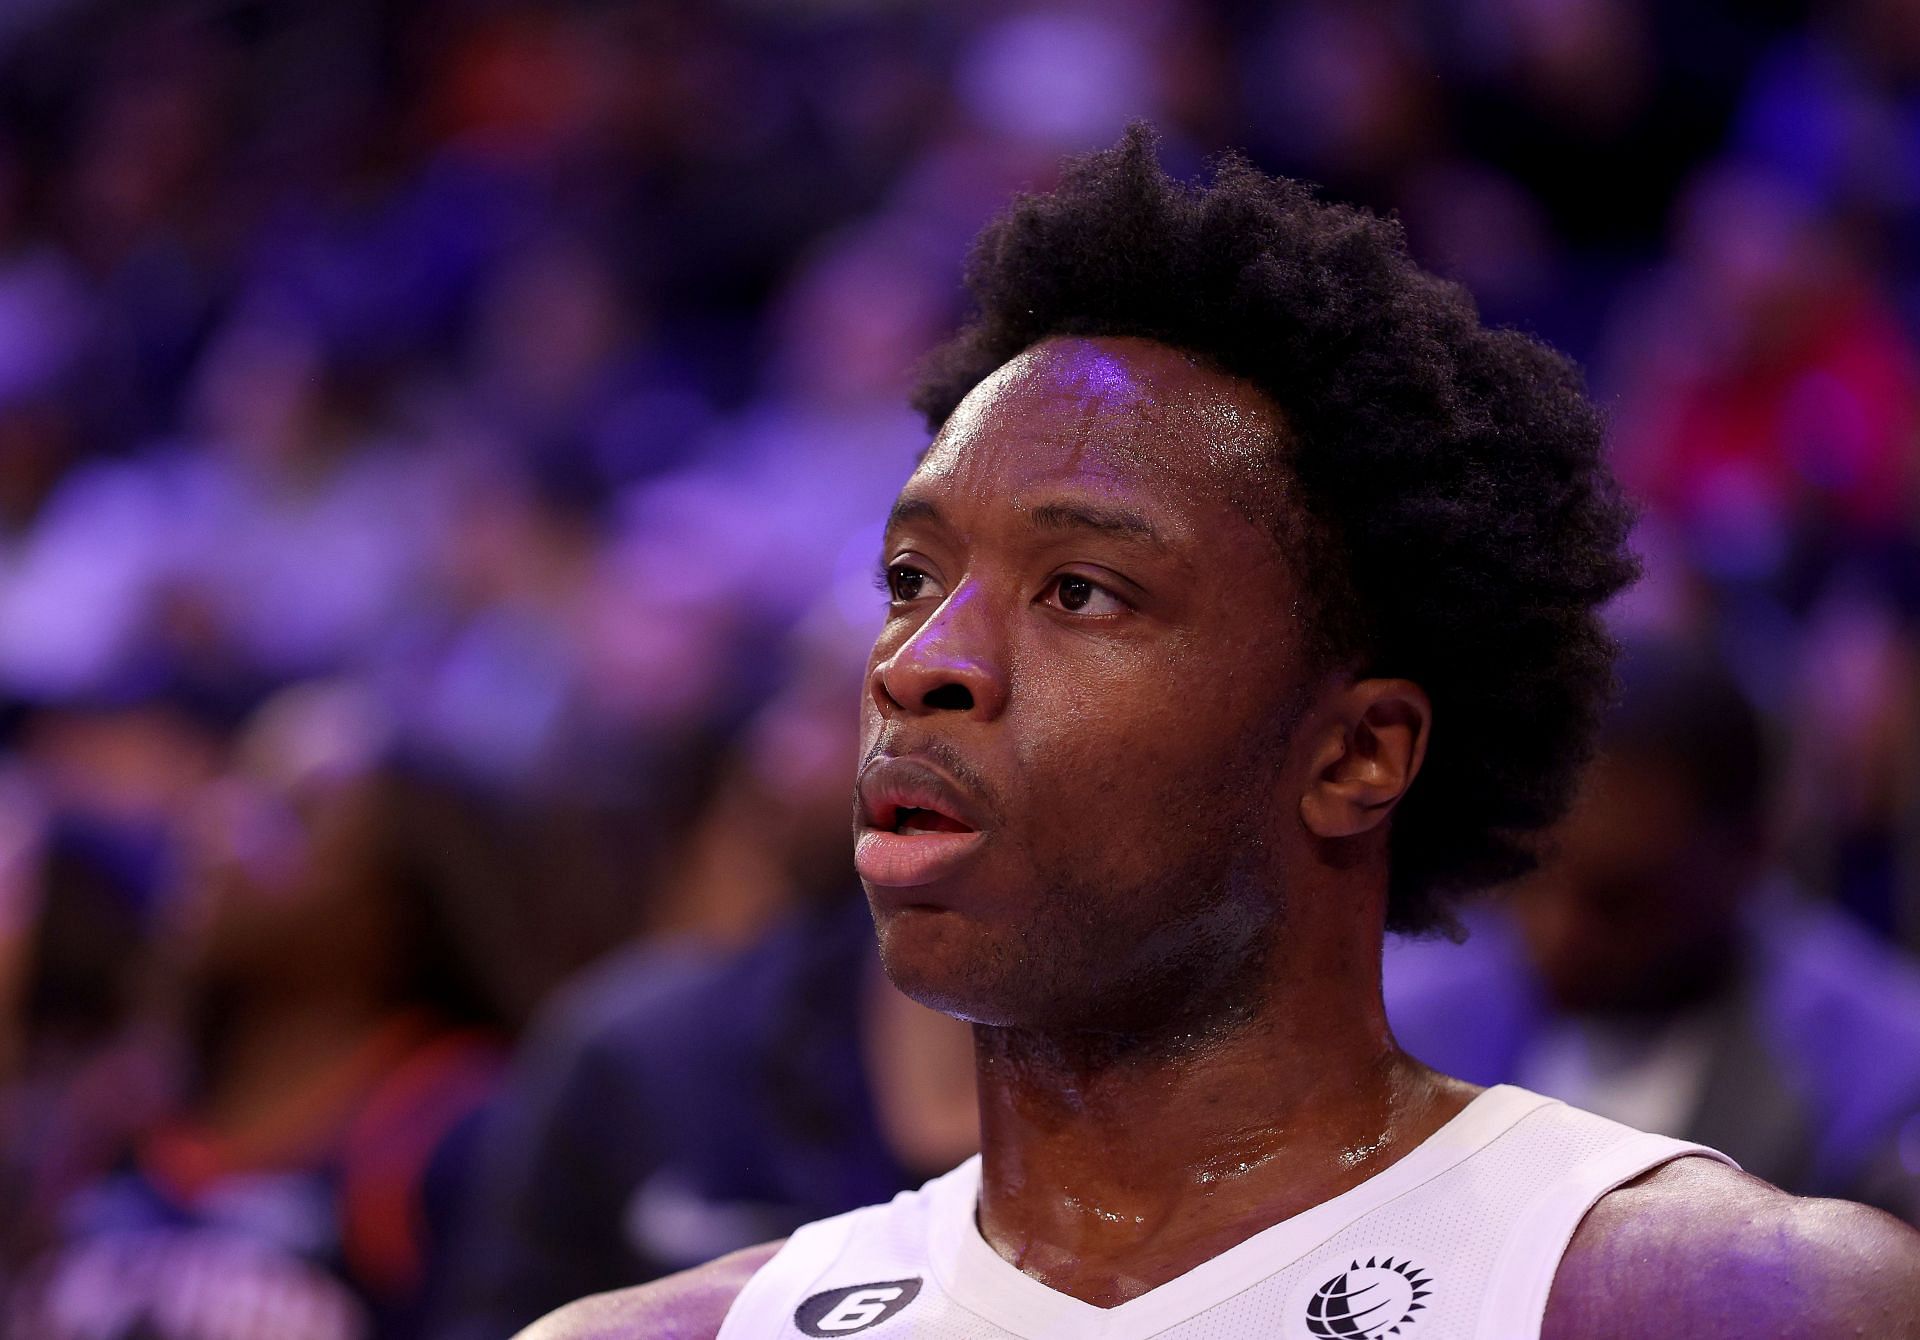 Toronto Raptors two-way forward OG Anunoby looks set to be traded soon